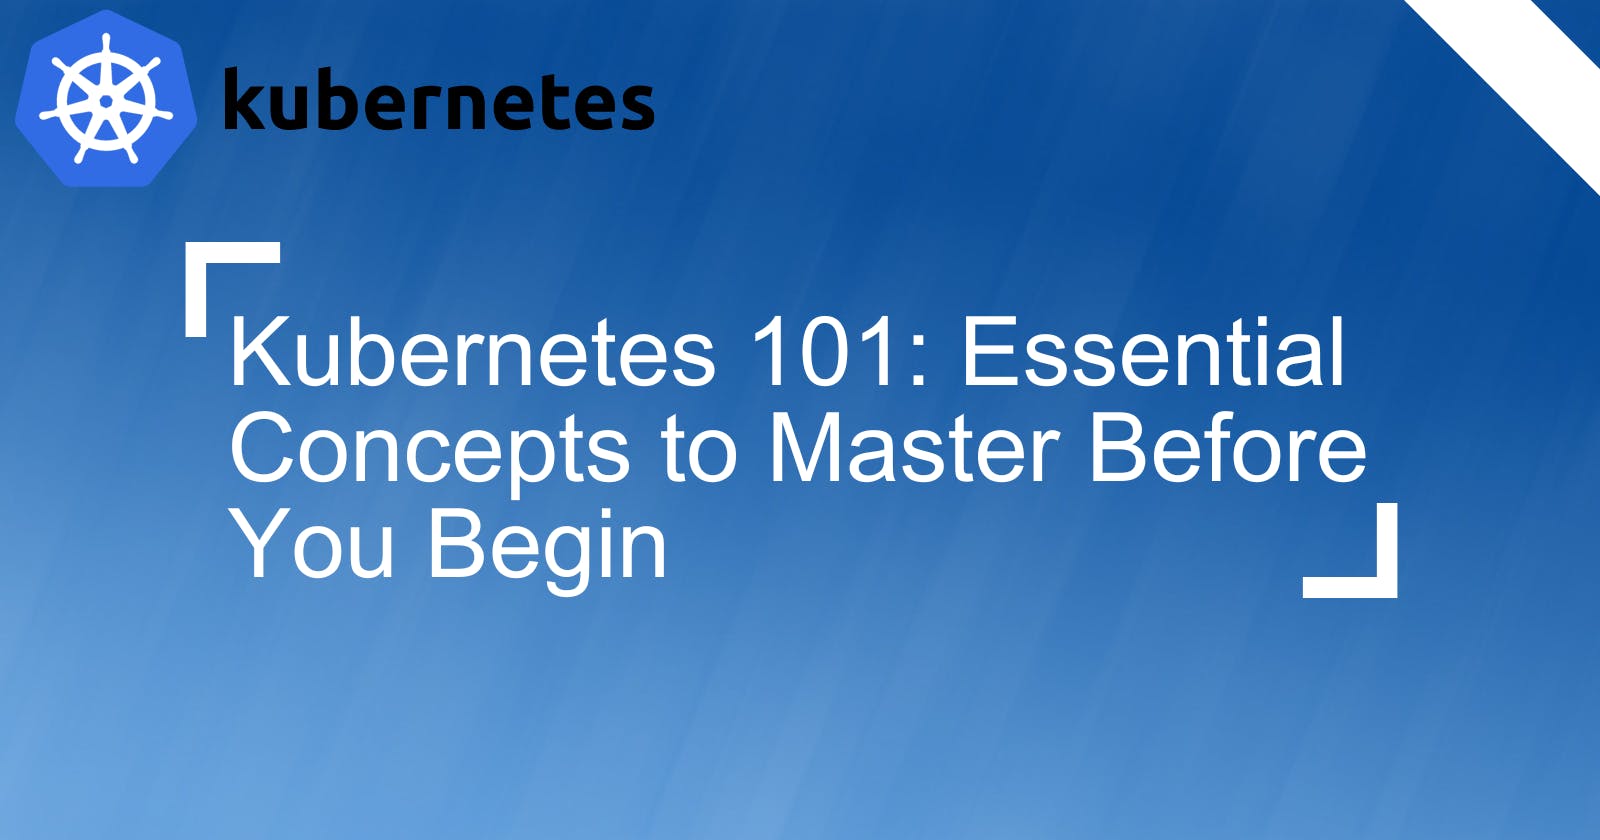 Kubernetes 101: Essential Concepts to Master Before You Begin